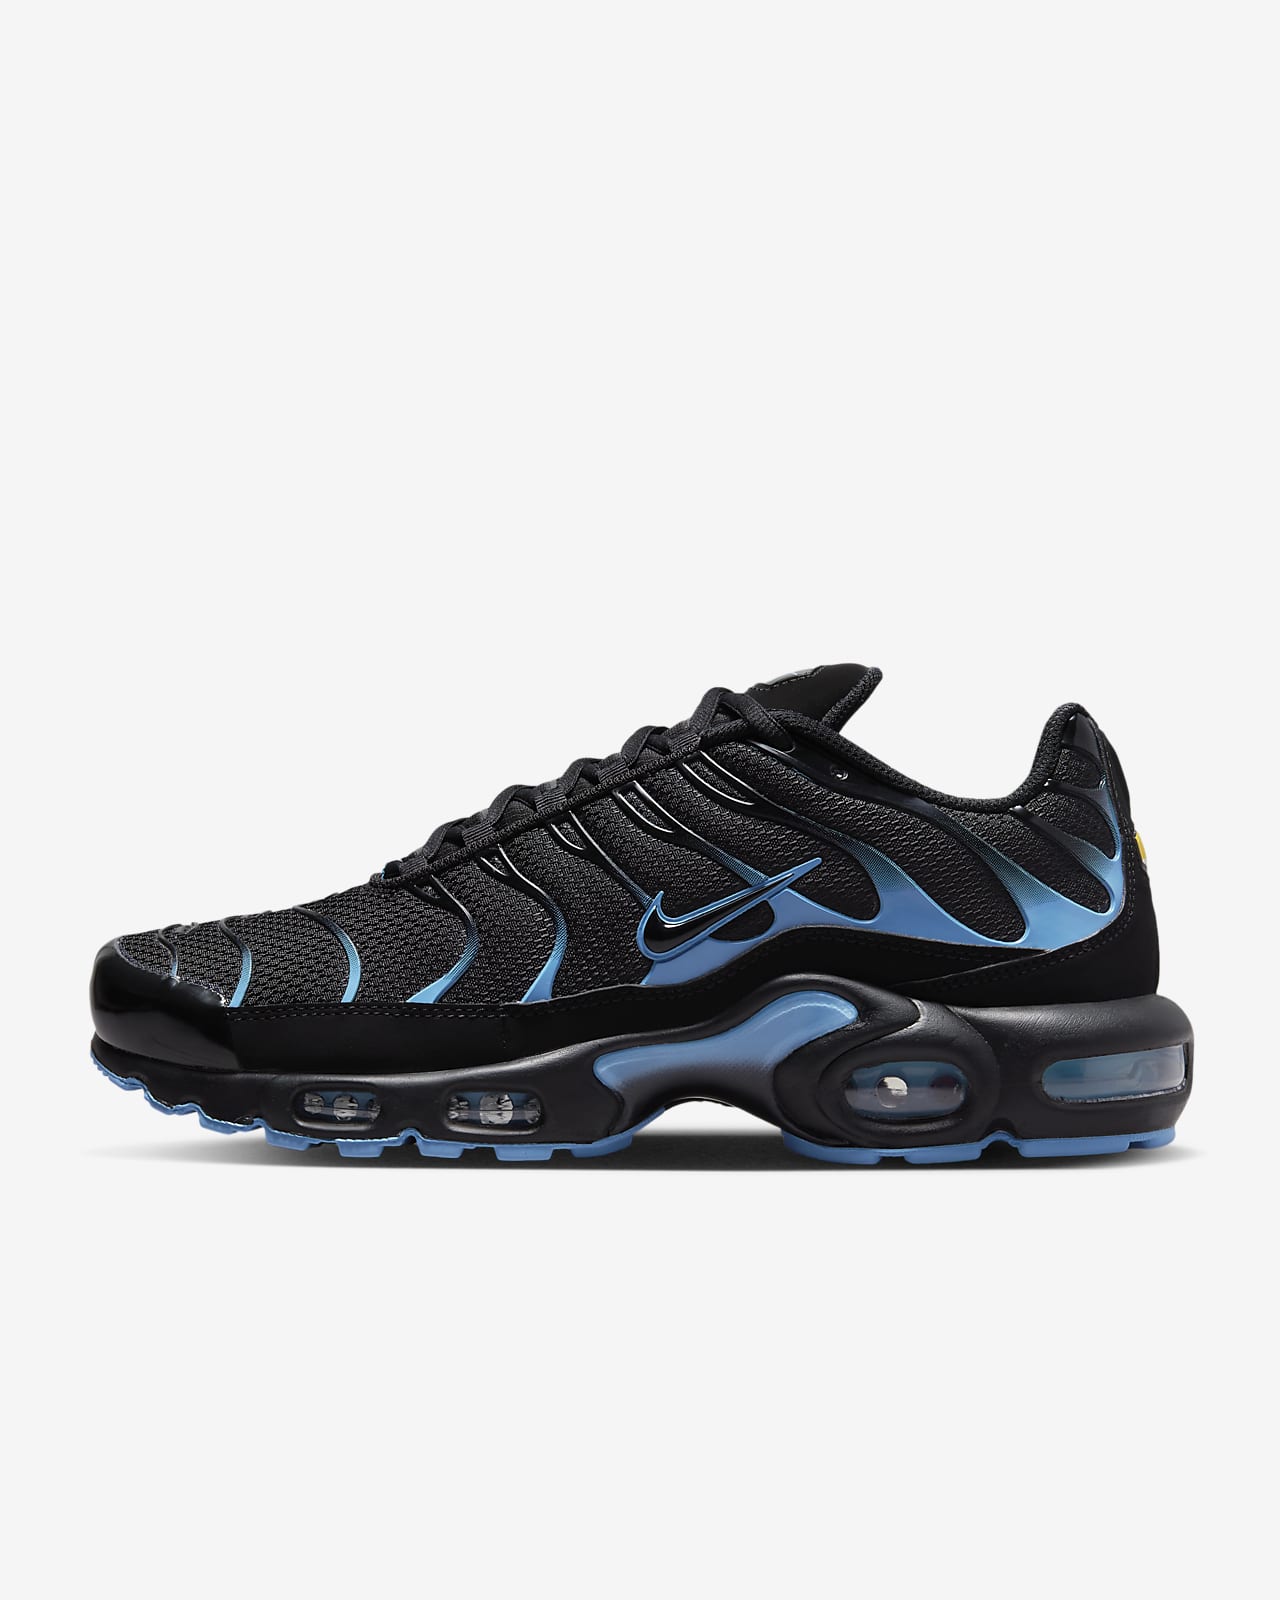 size 7 men's nike air max shoes